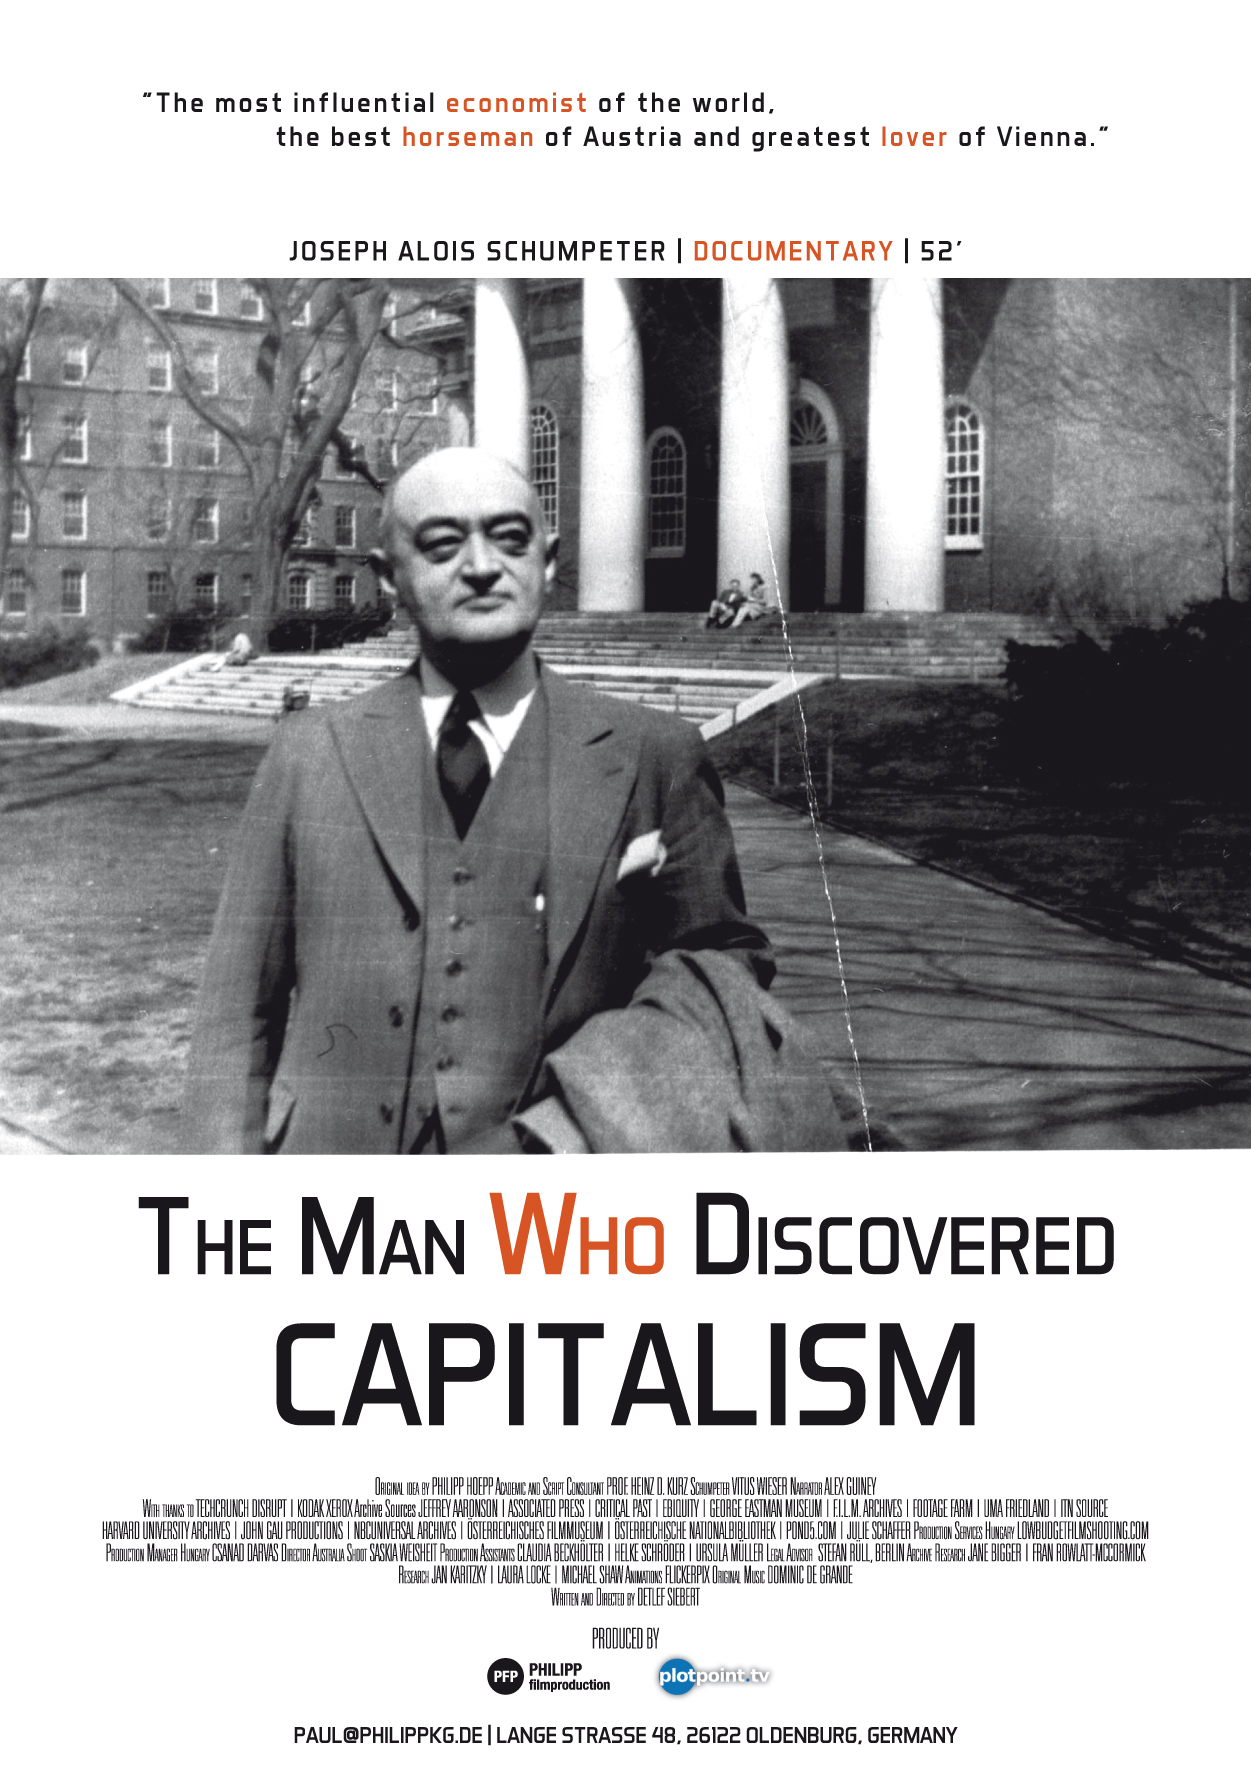 The Man Who Discovered Capitalism